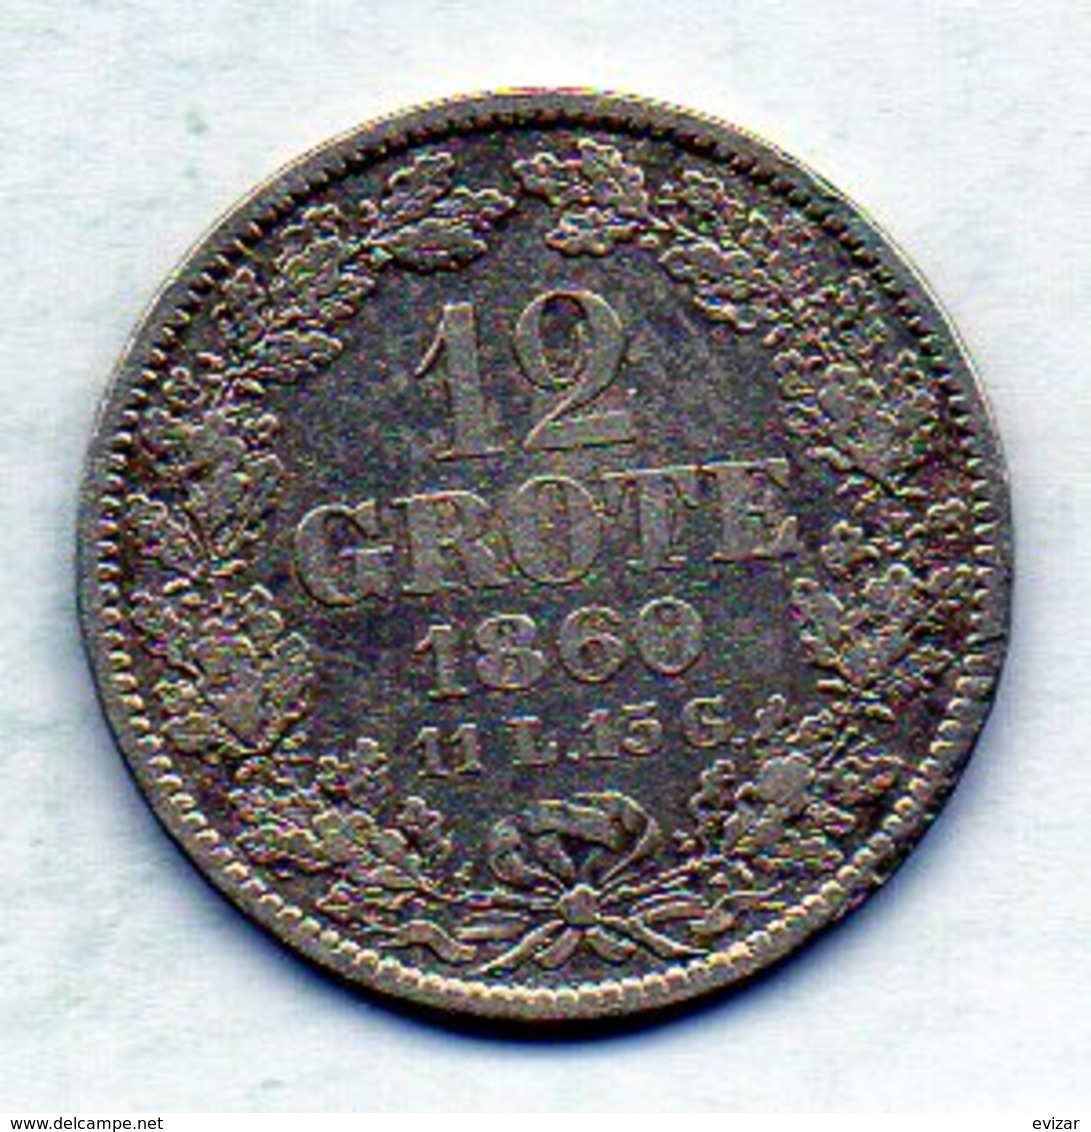 GERMAN STATES - BREMEN, 12 Grote, Silver, 1860, KM #242 - Small Coins & Other Subdivisions